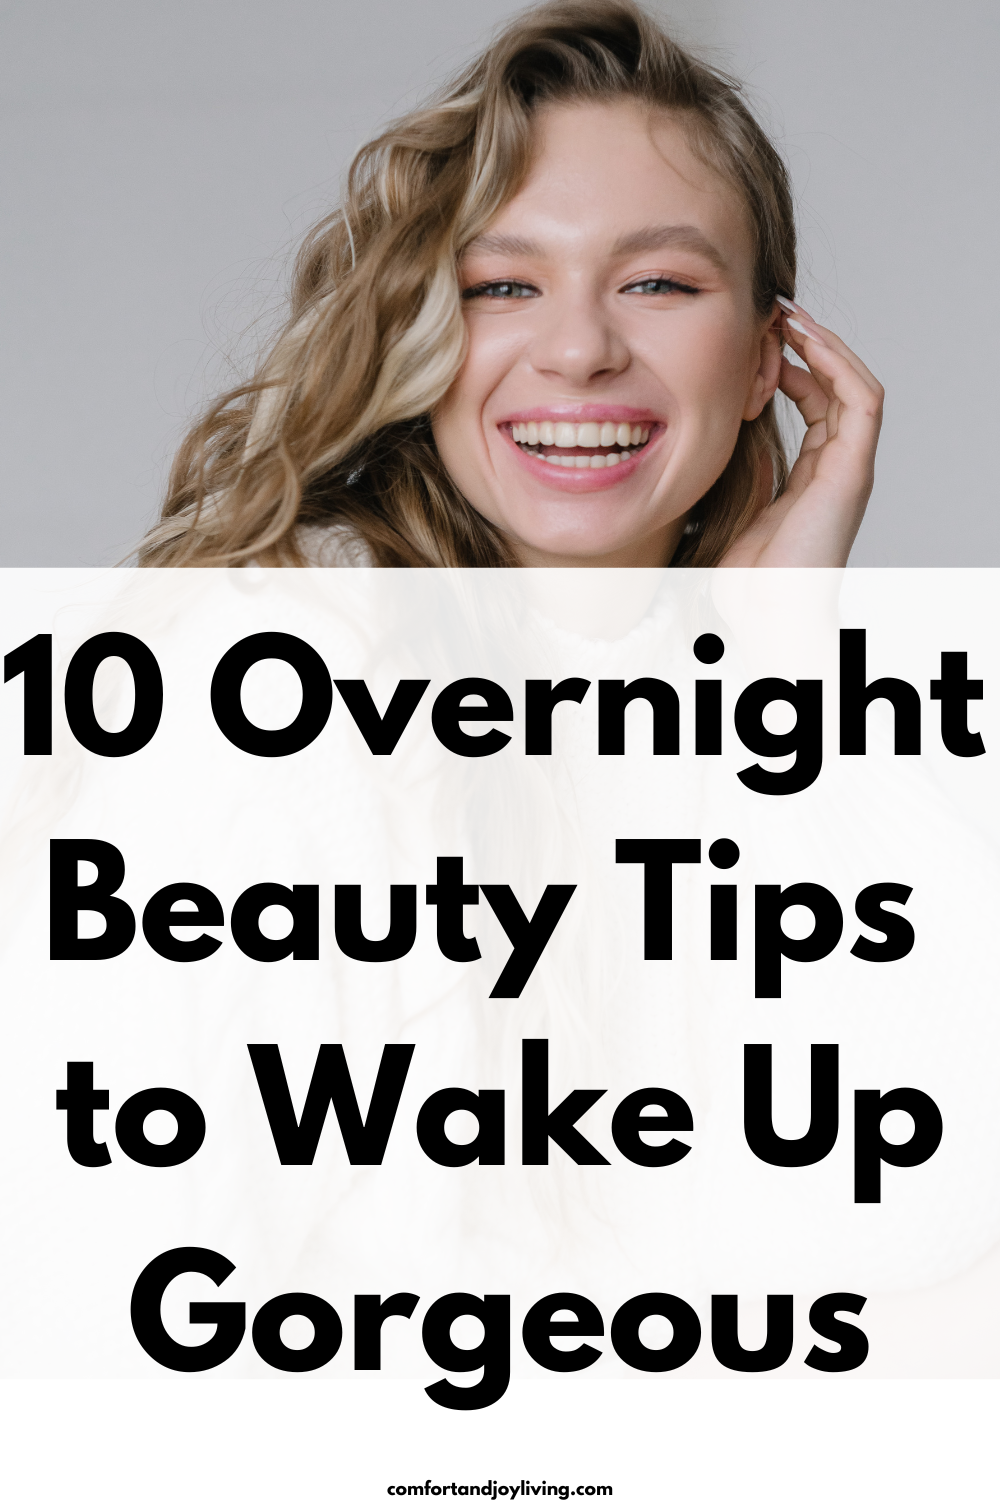 10 Overnight Beauty Tips to Wake Up Gorgeous